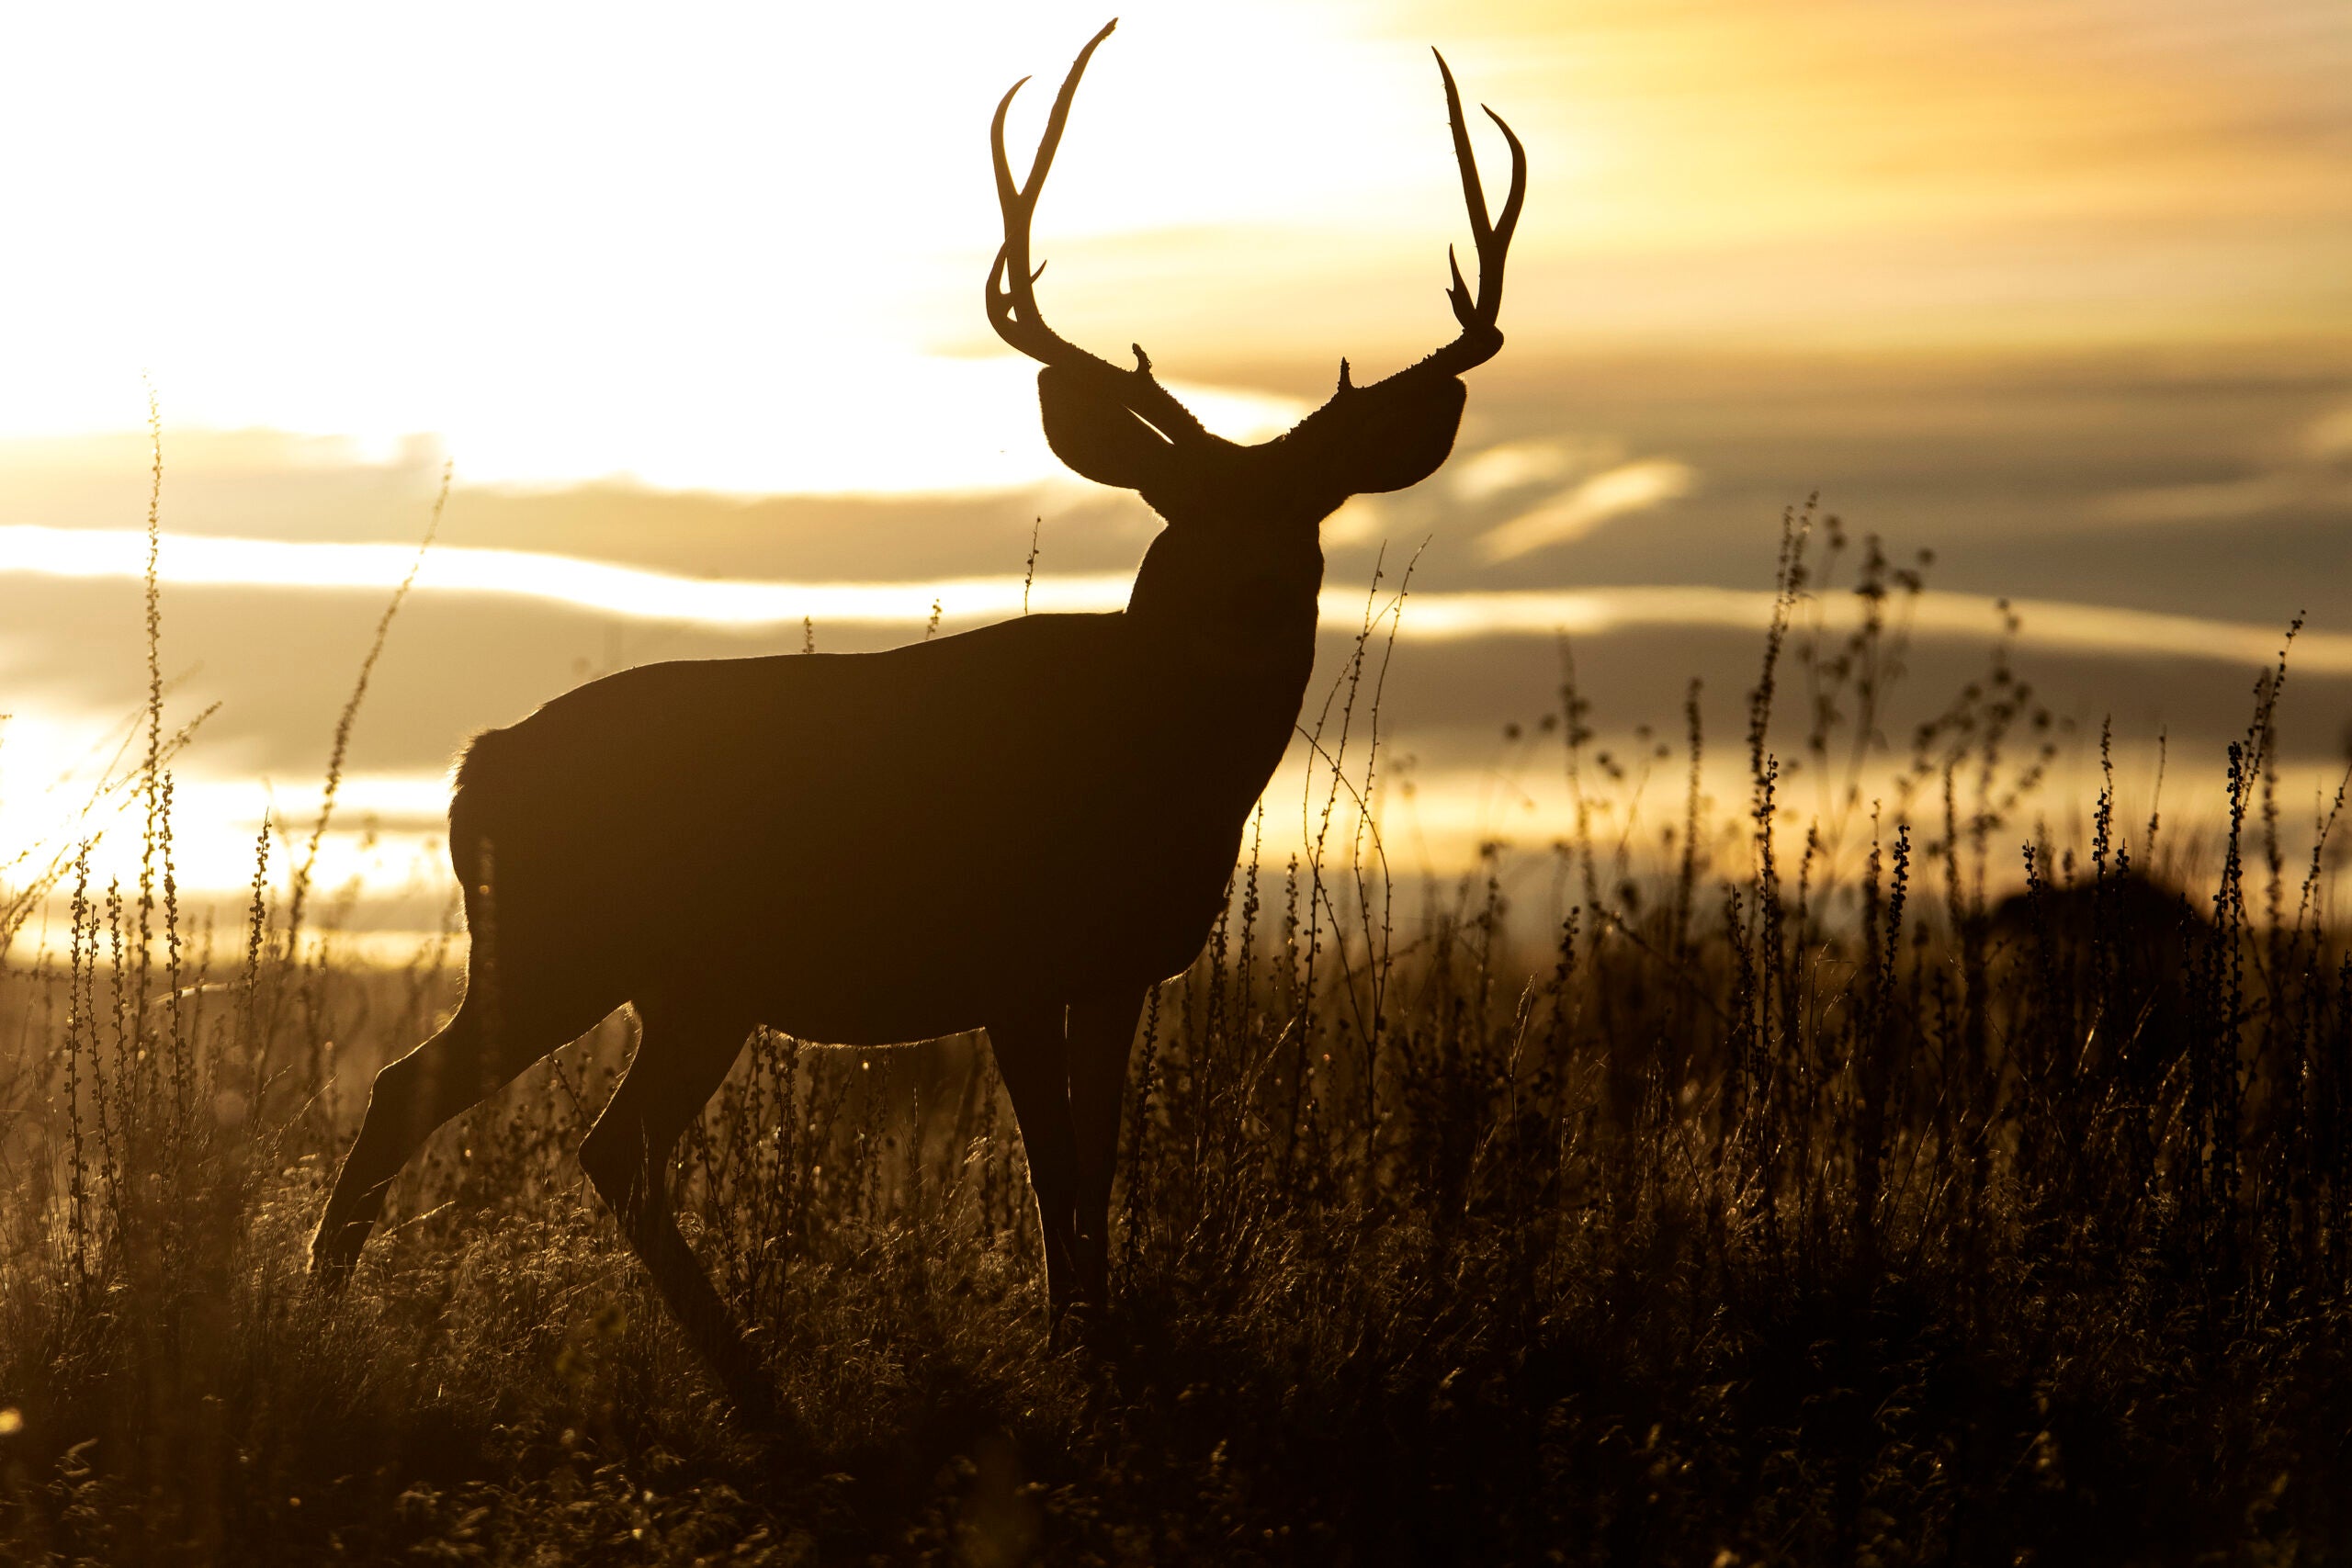 Sunset Buck  Mule deer buck at sunset. All rights reserved